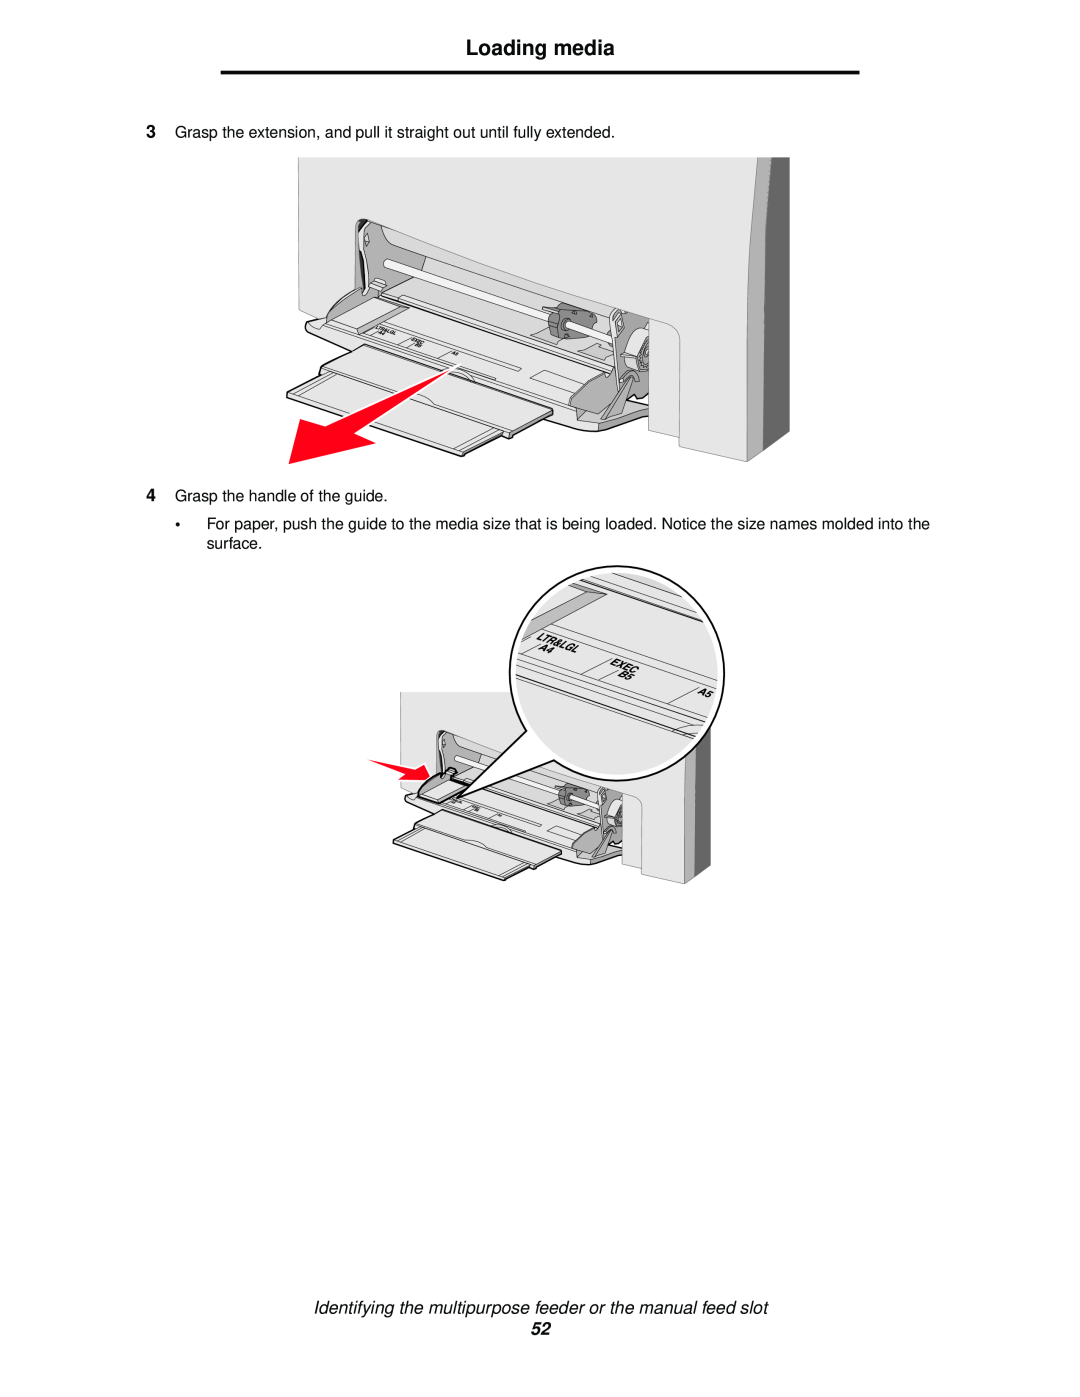 Lexmark C520 Loading media, Identifying the multipurpose feeder or the manual feed slot, Grasp the handle of the guide 